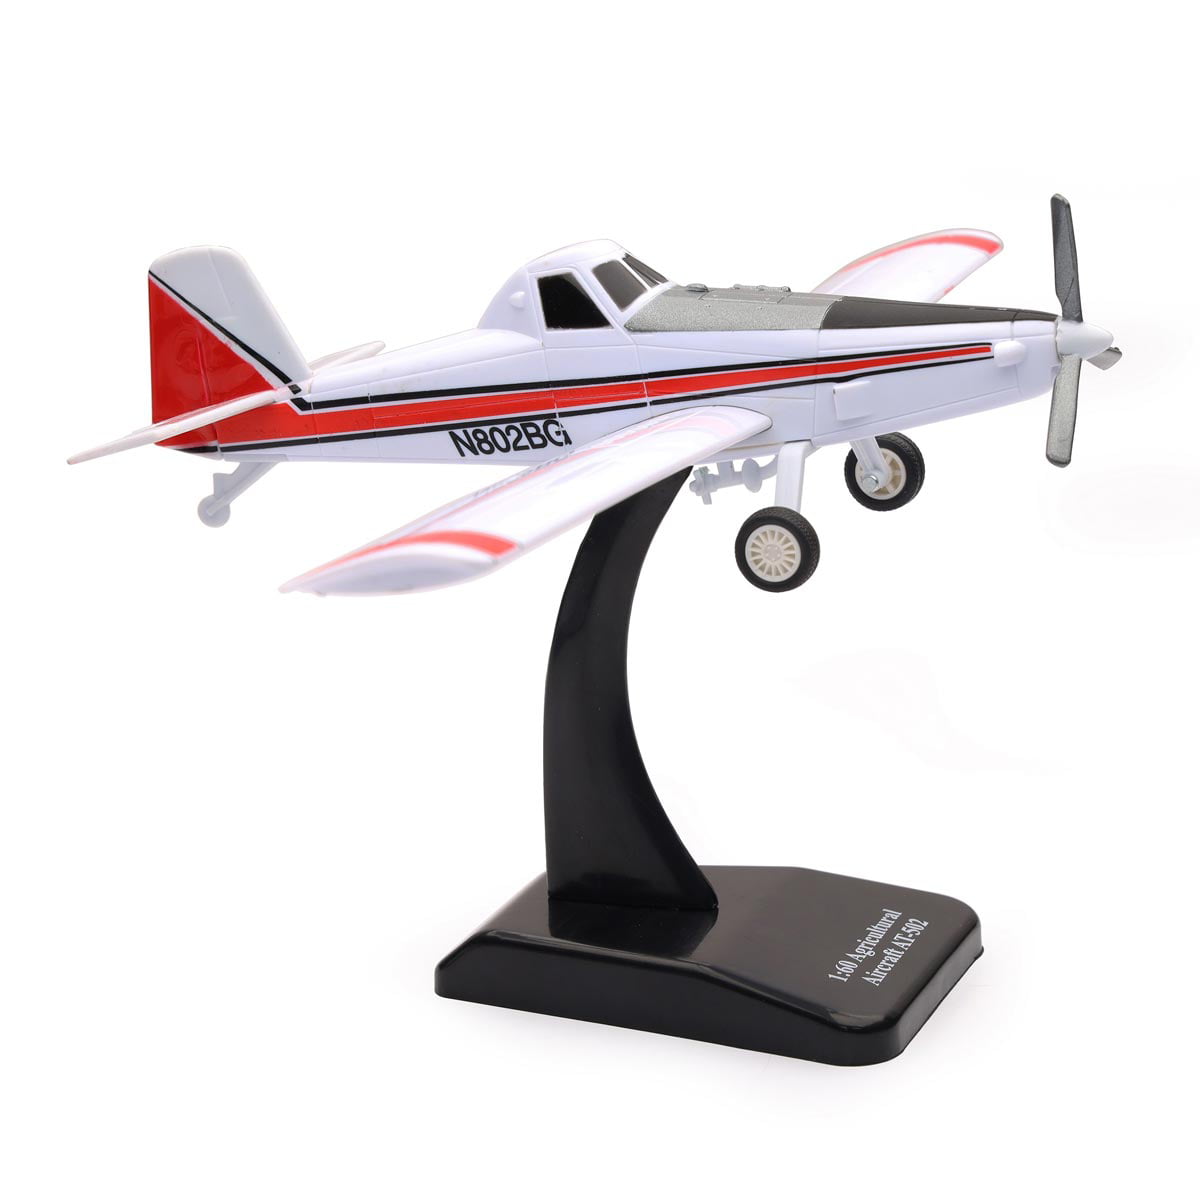 New Ray 1/60 Air Tractor AT-502 for sale online